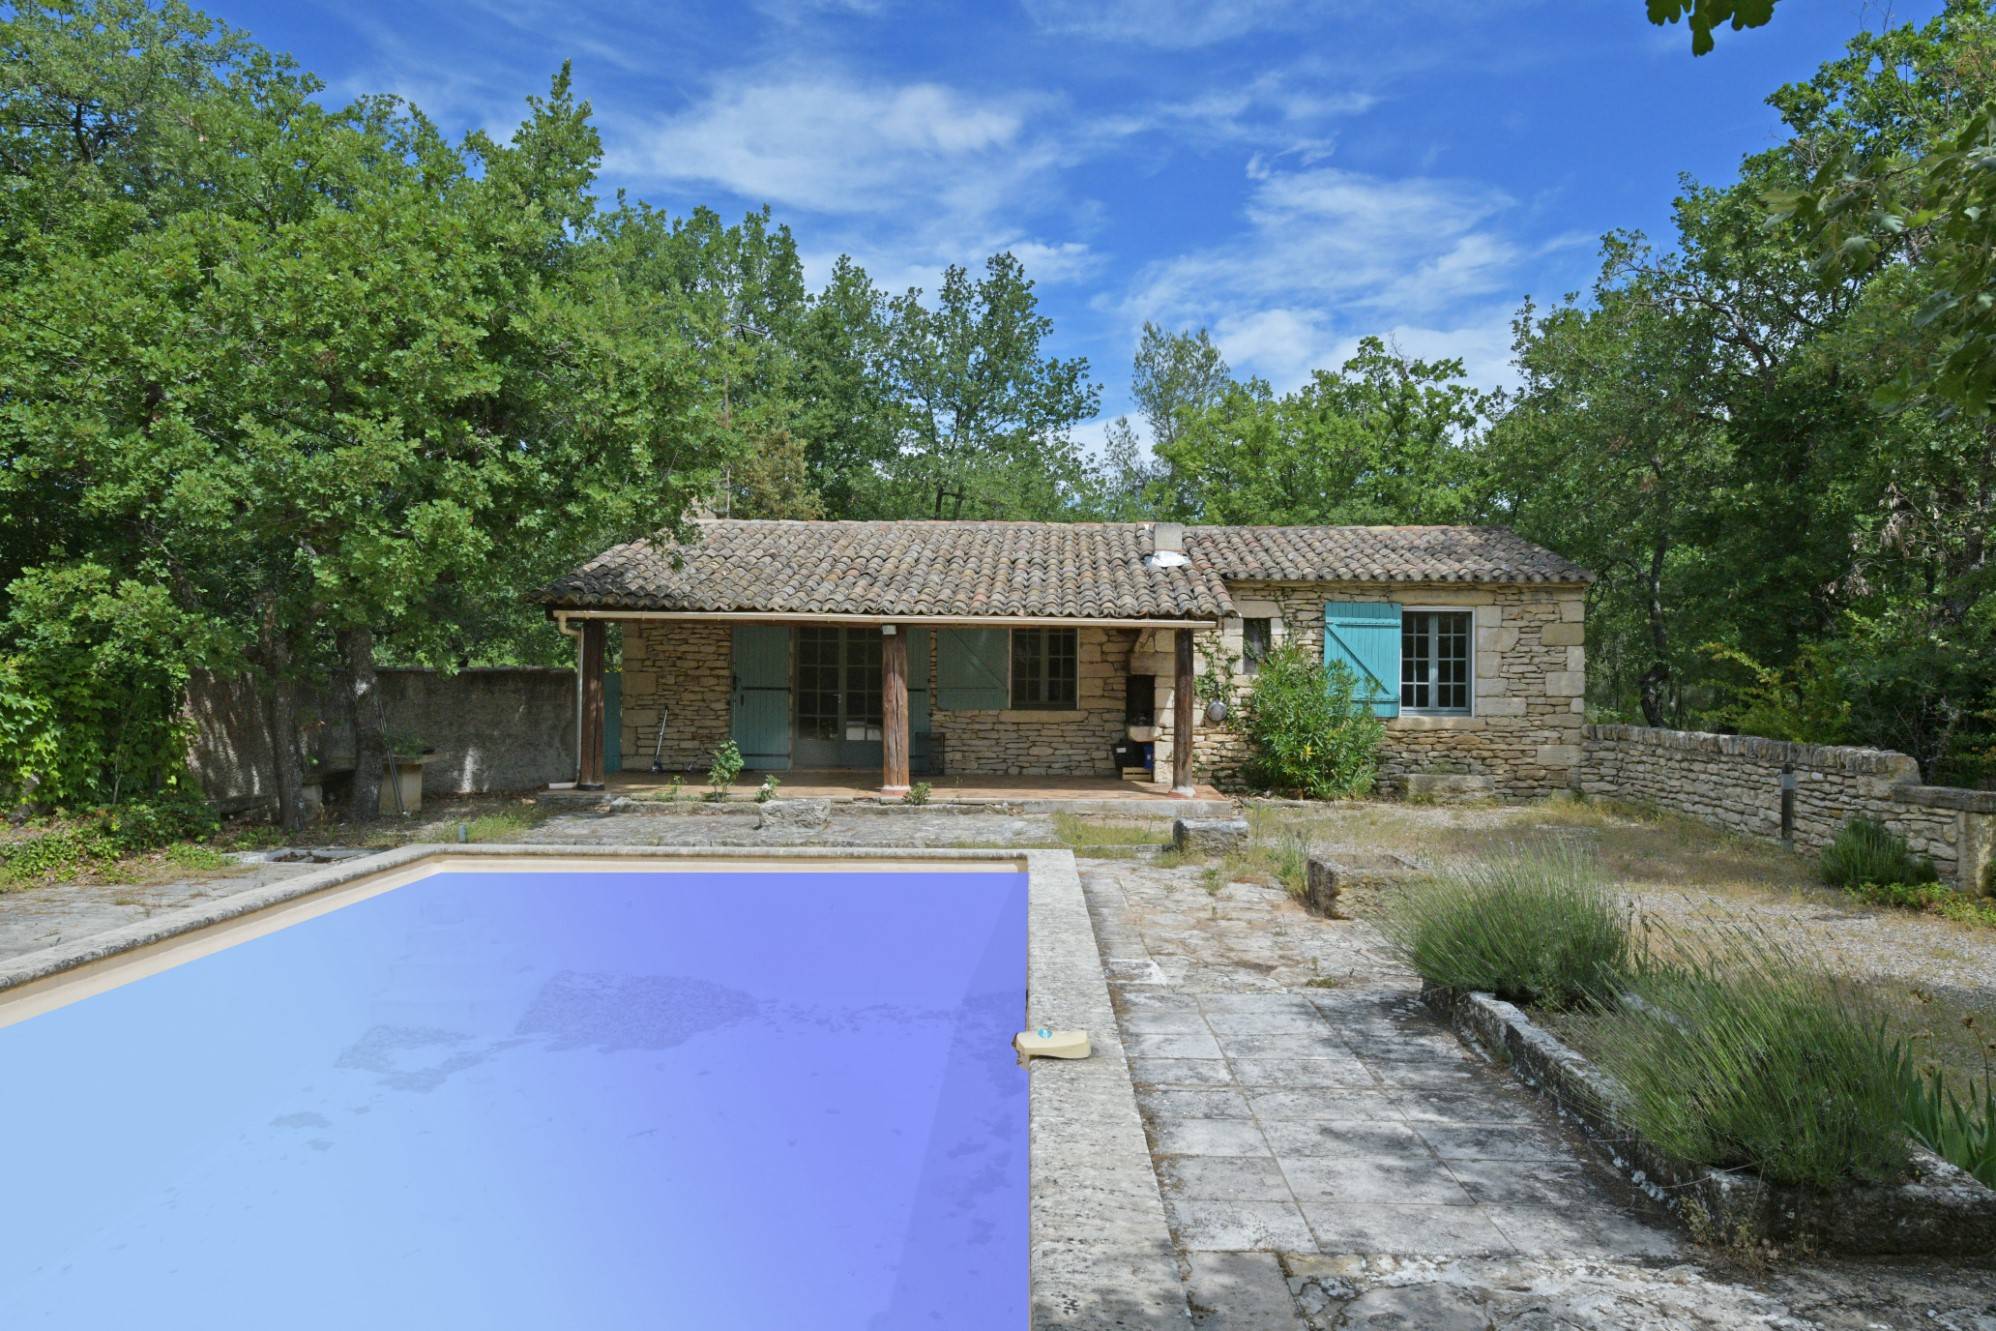 For sale in Gordes, stone house with swimming pool 